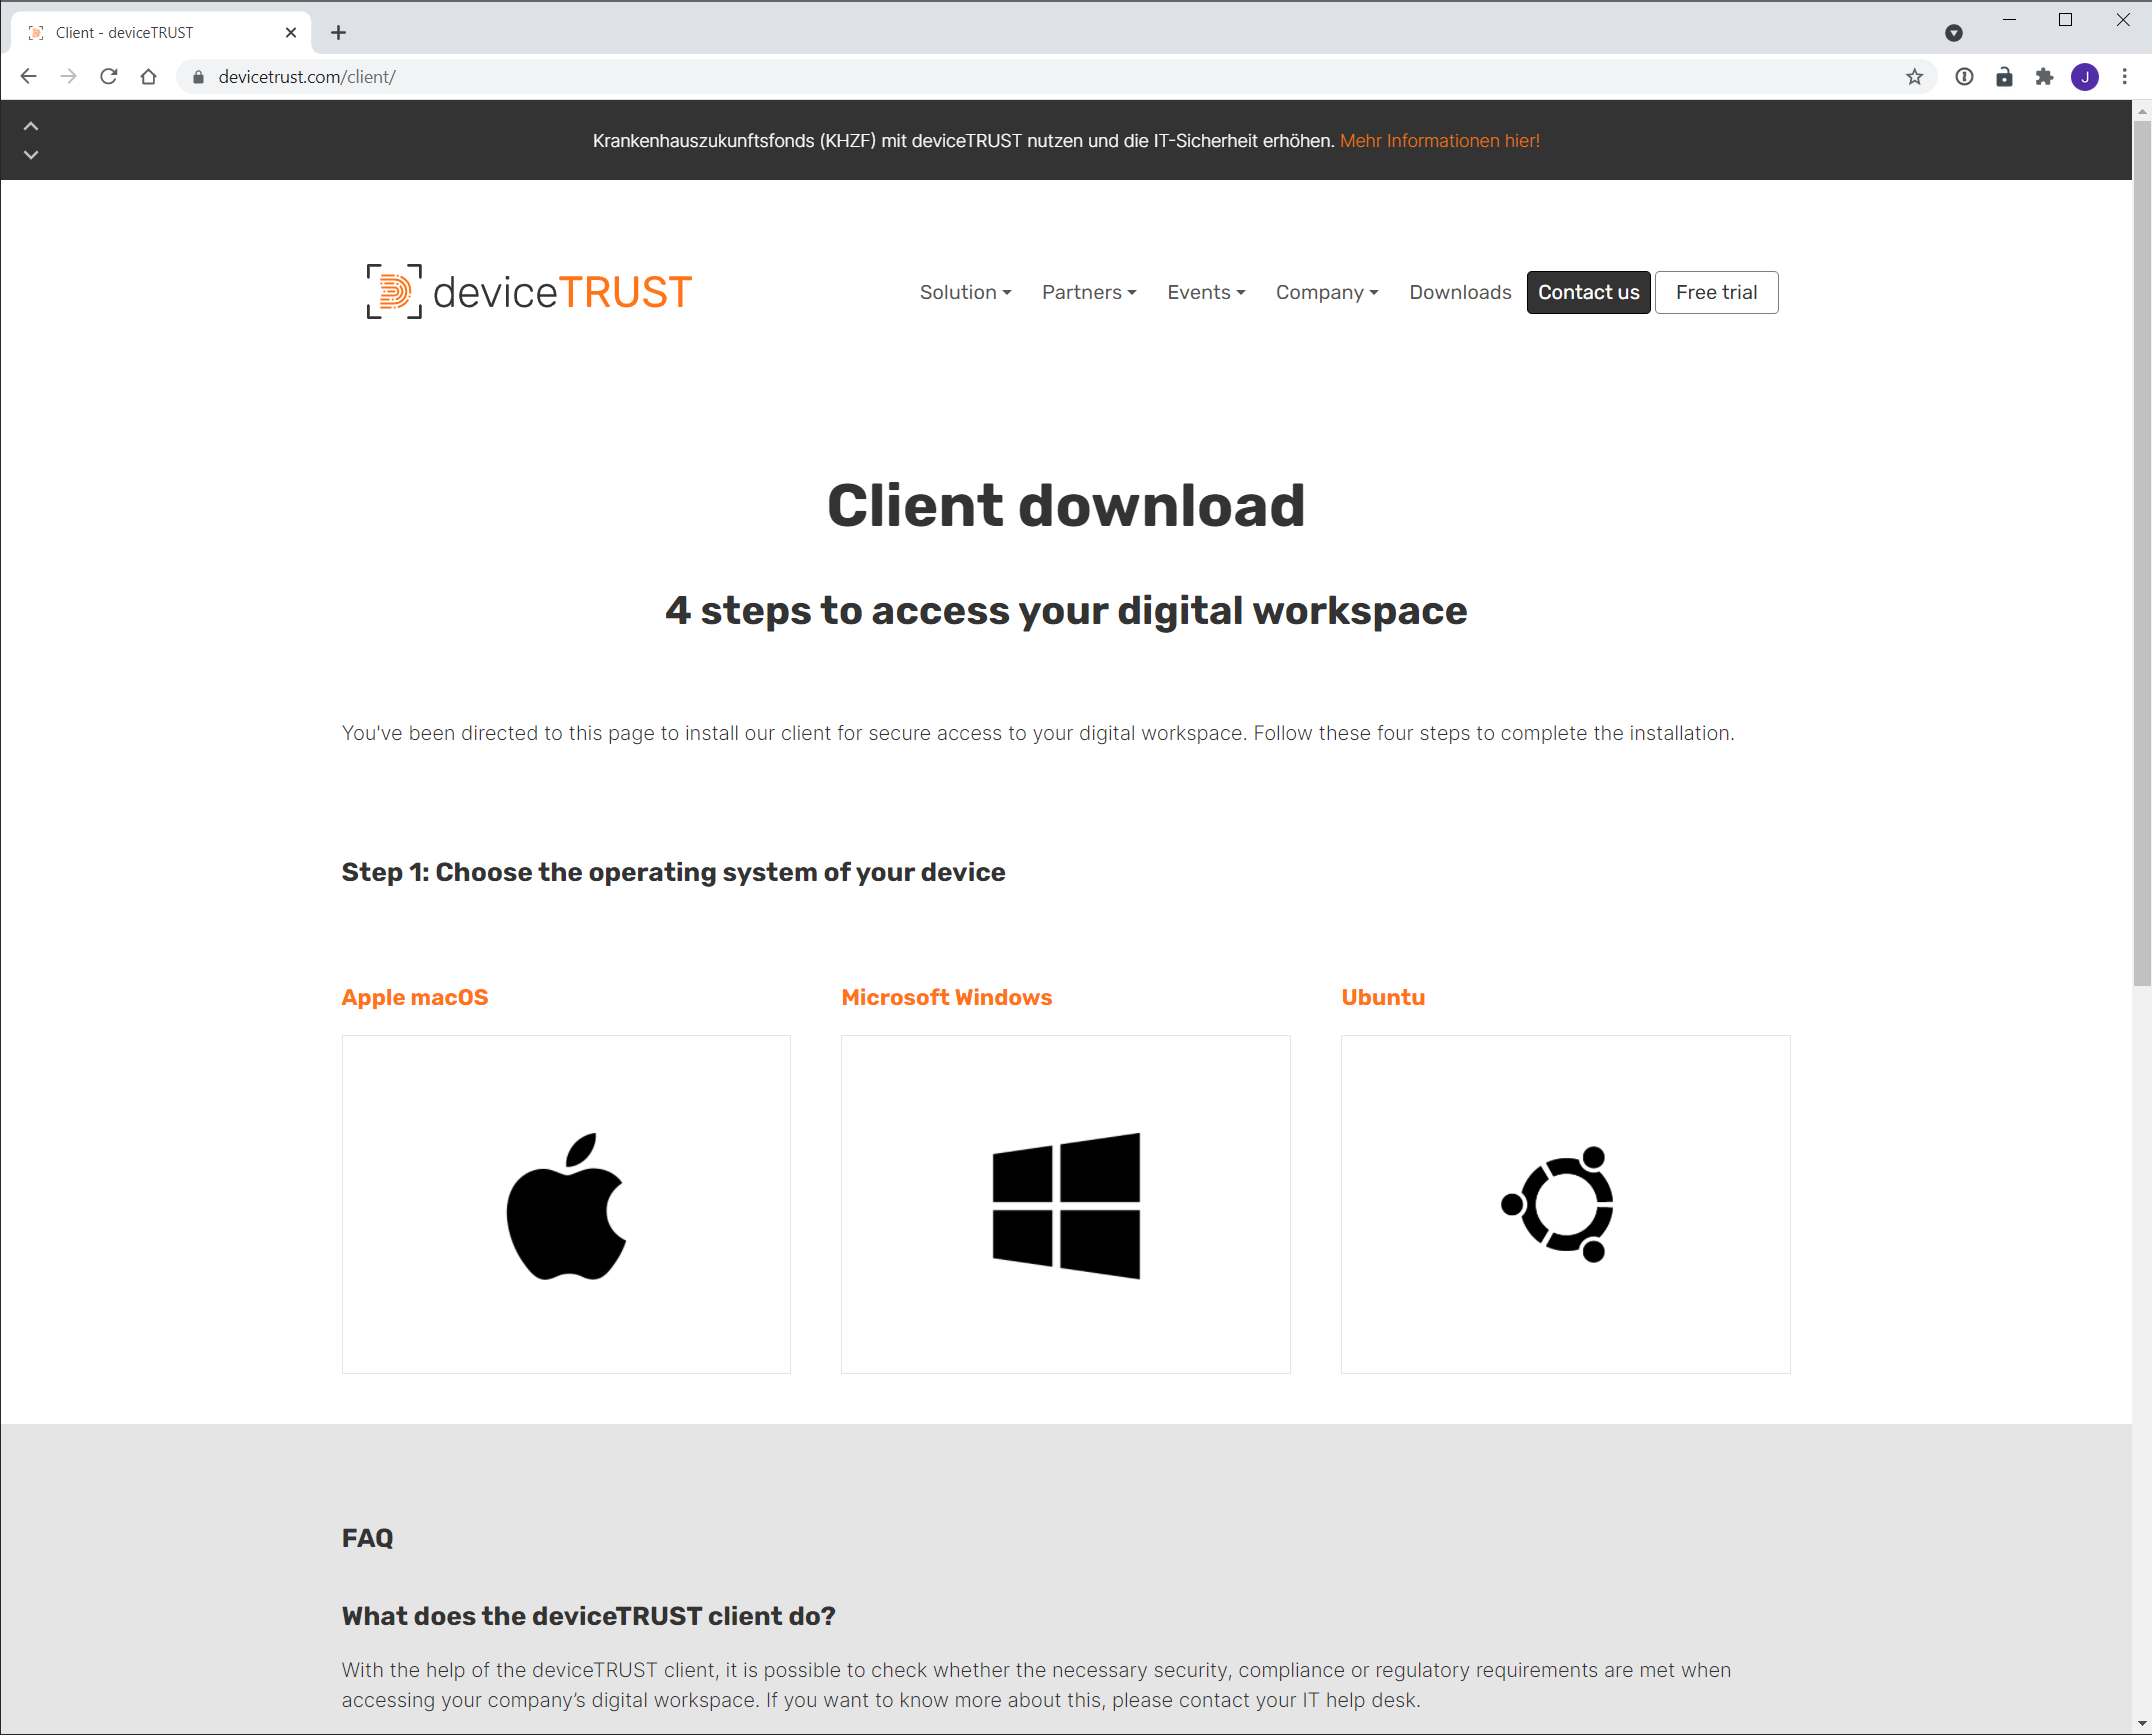 The deviceTRUST Client Extension Download Page